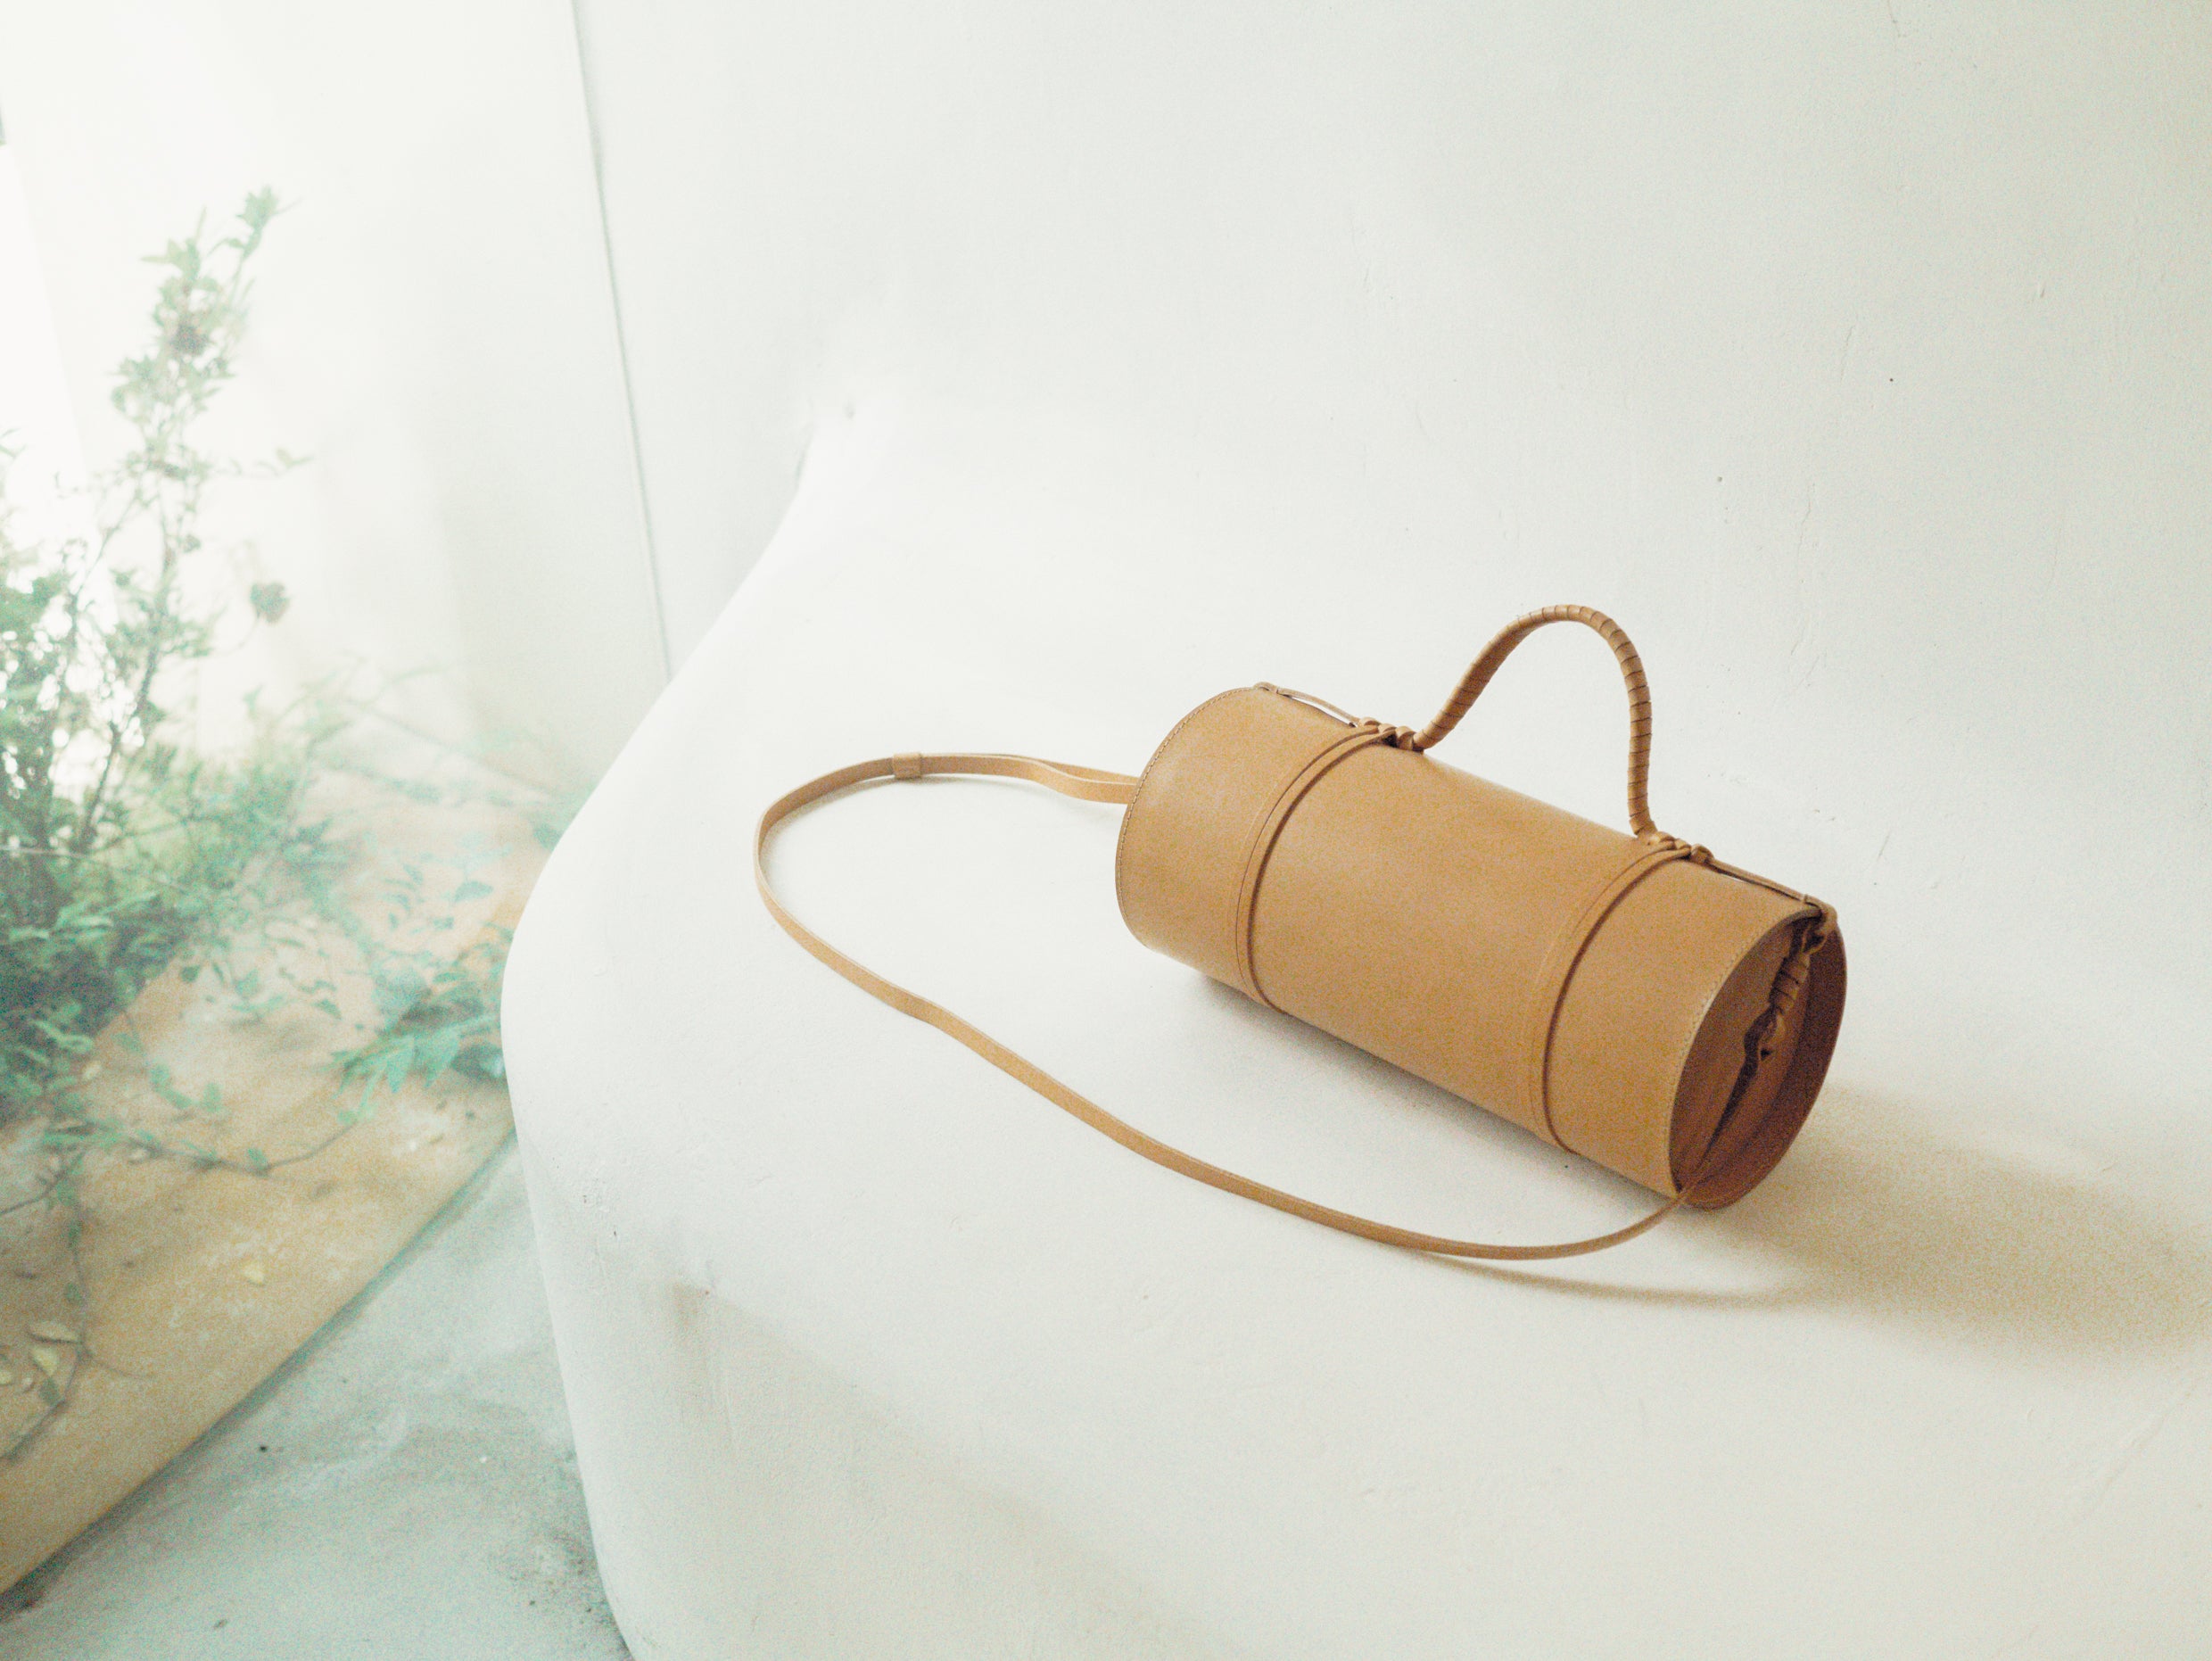 Woven Bamboo Bag in Natural